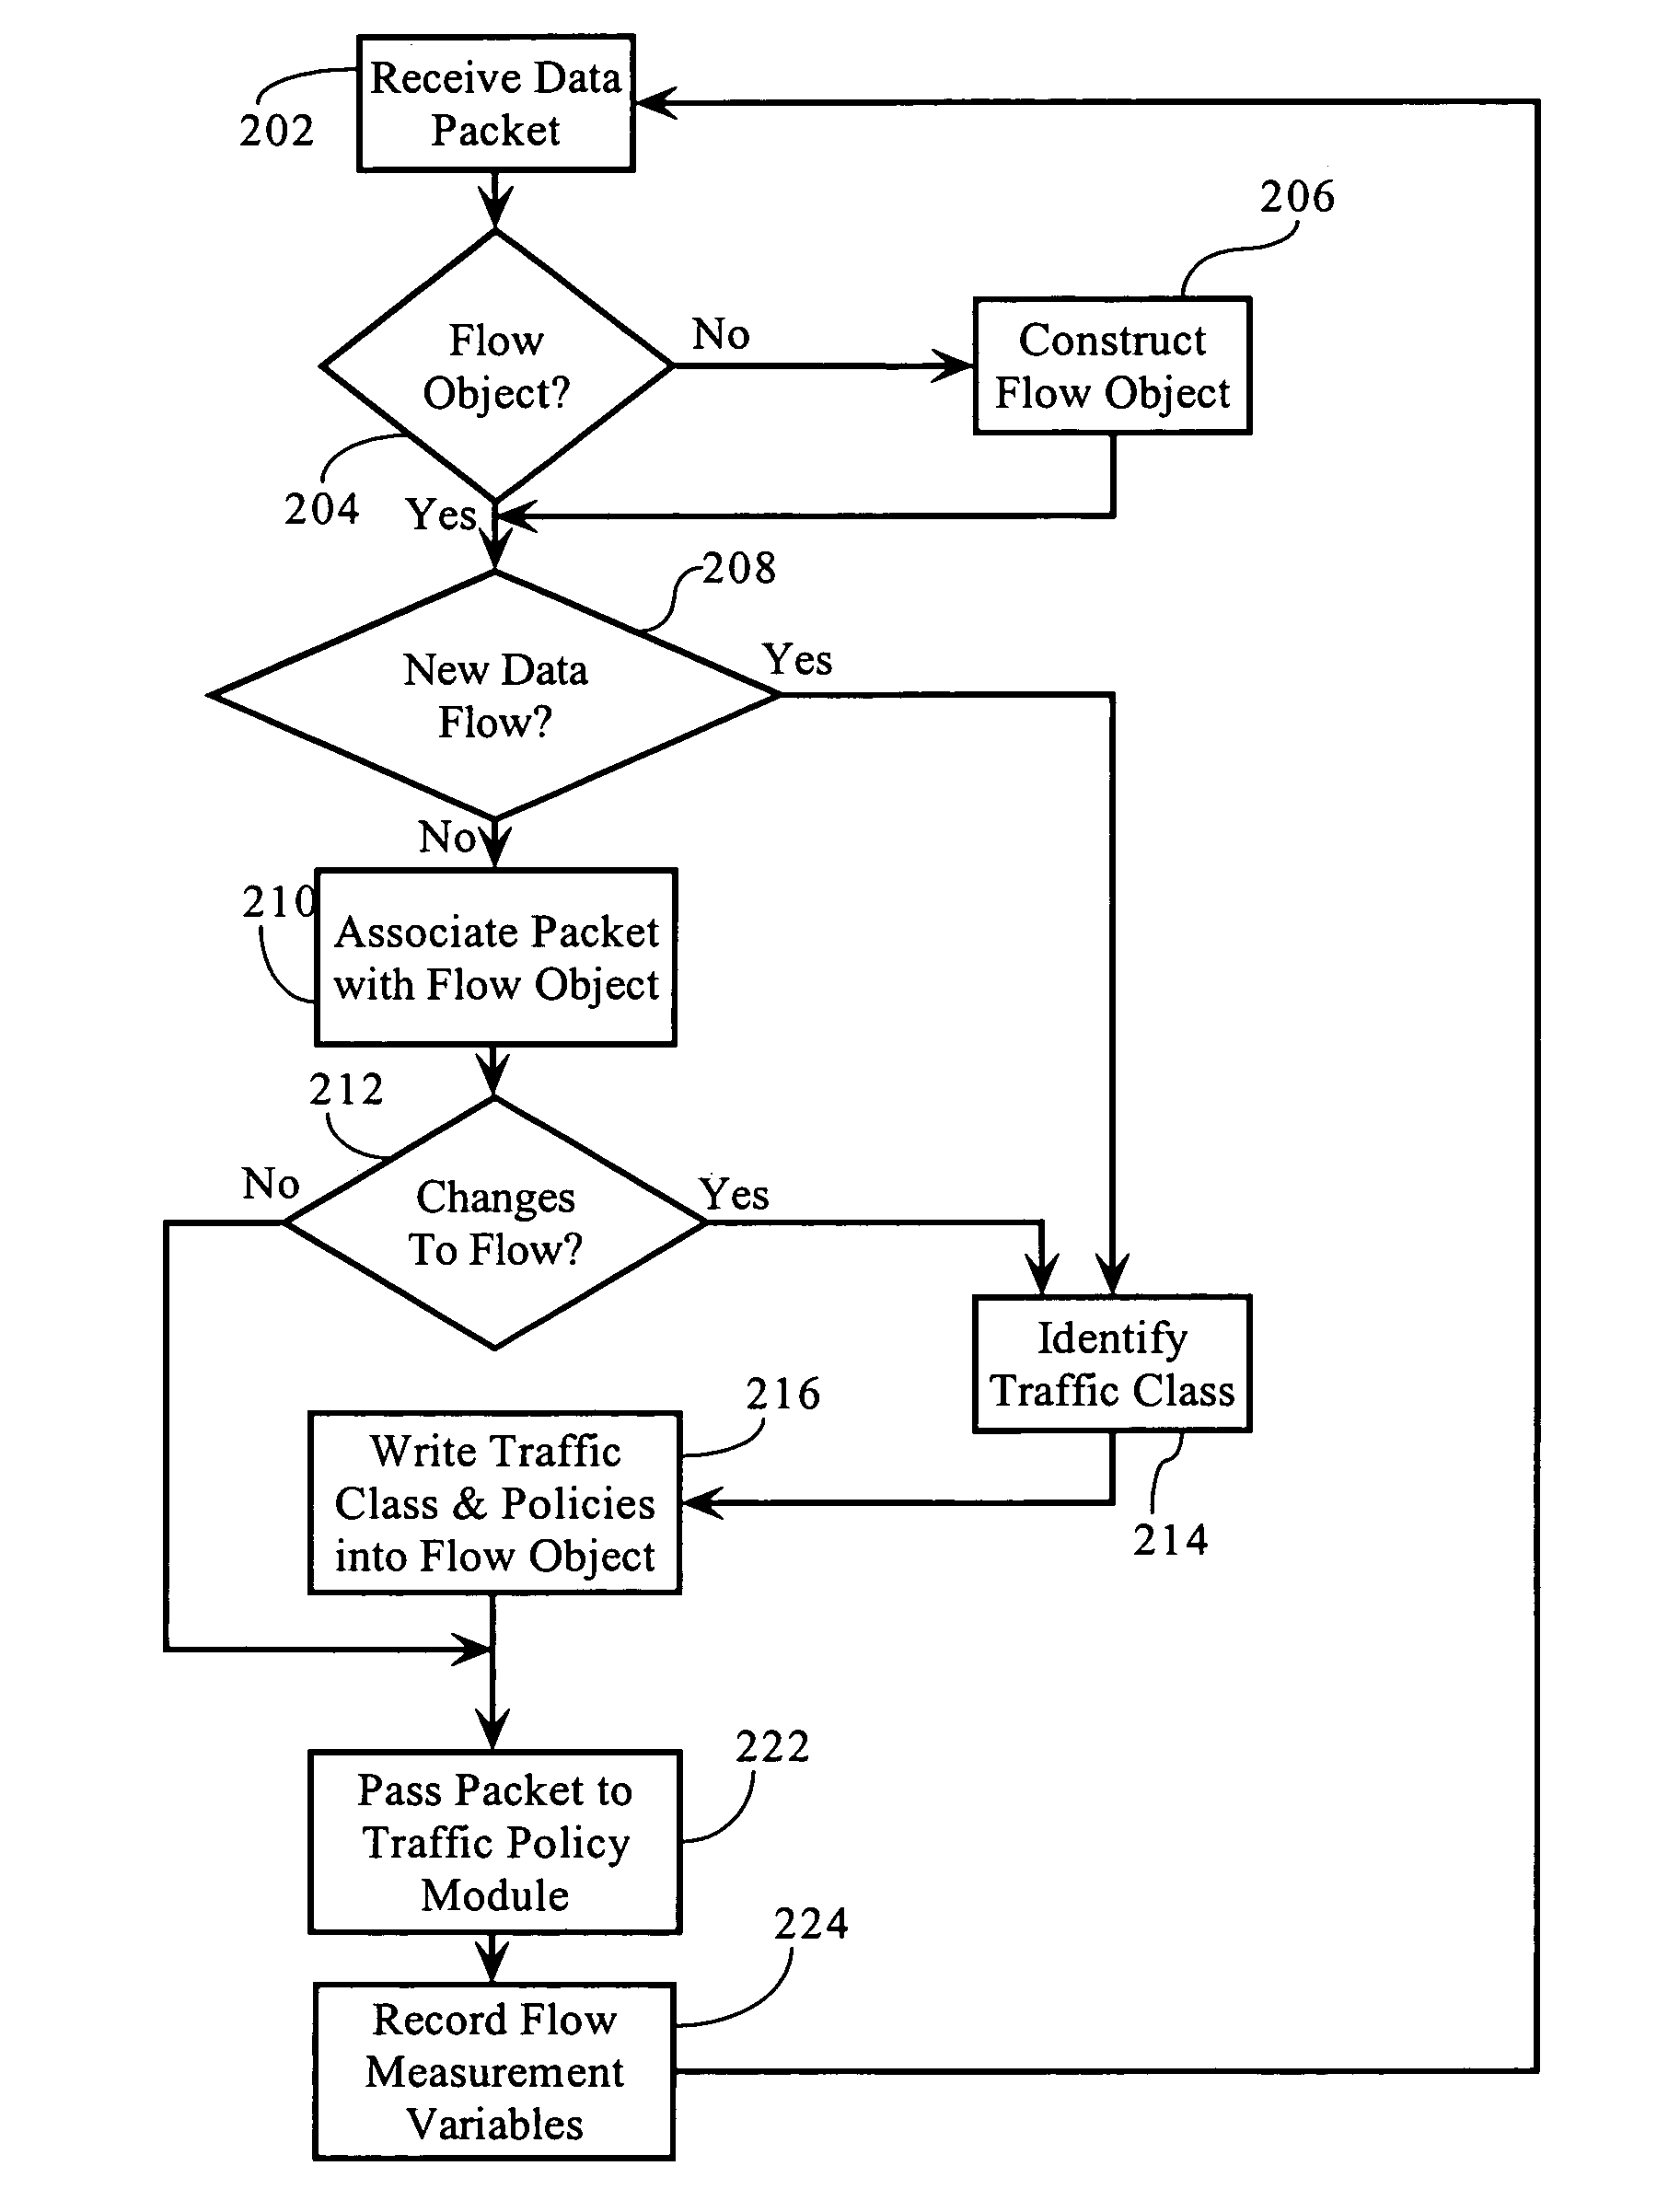 Adaptive, application-aware selection of differentiated network services